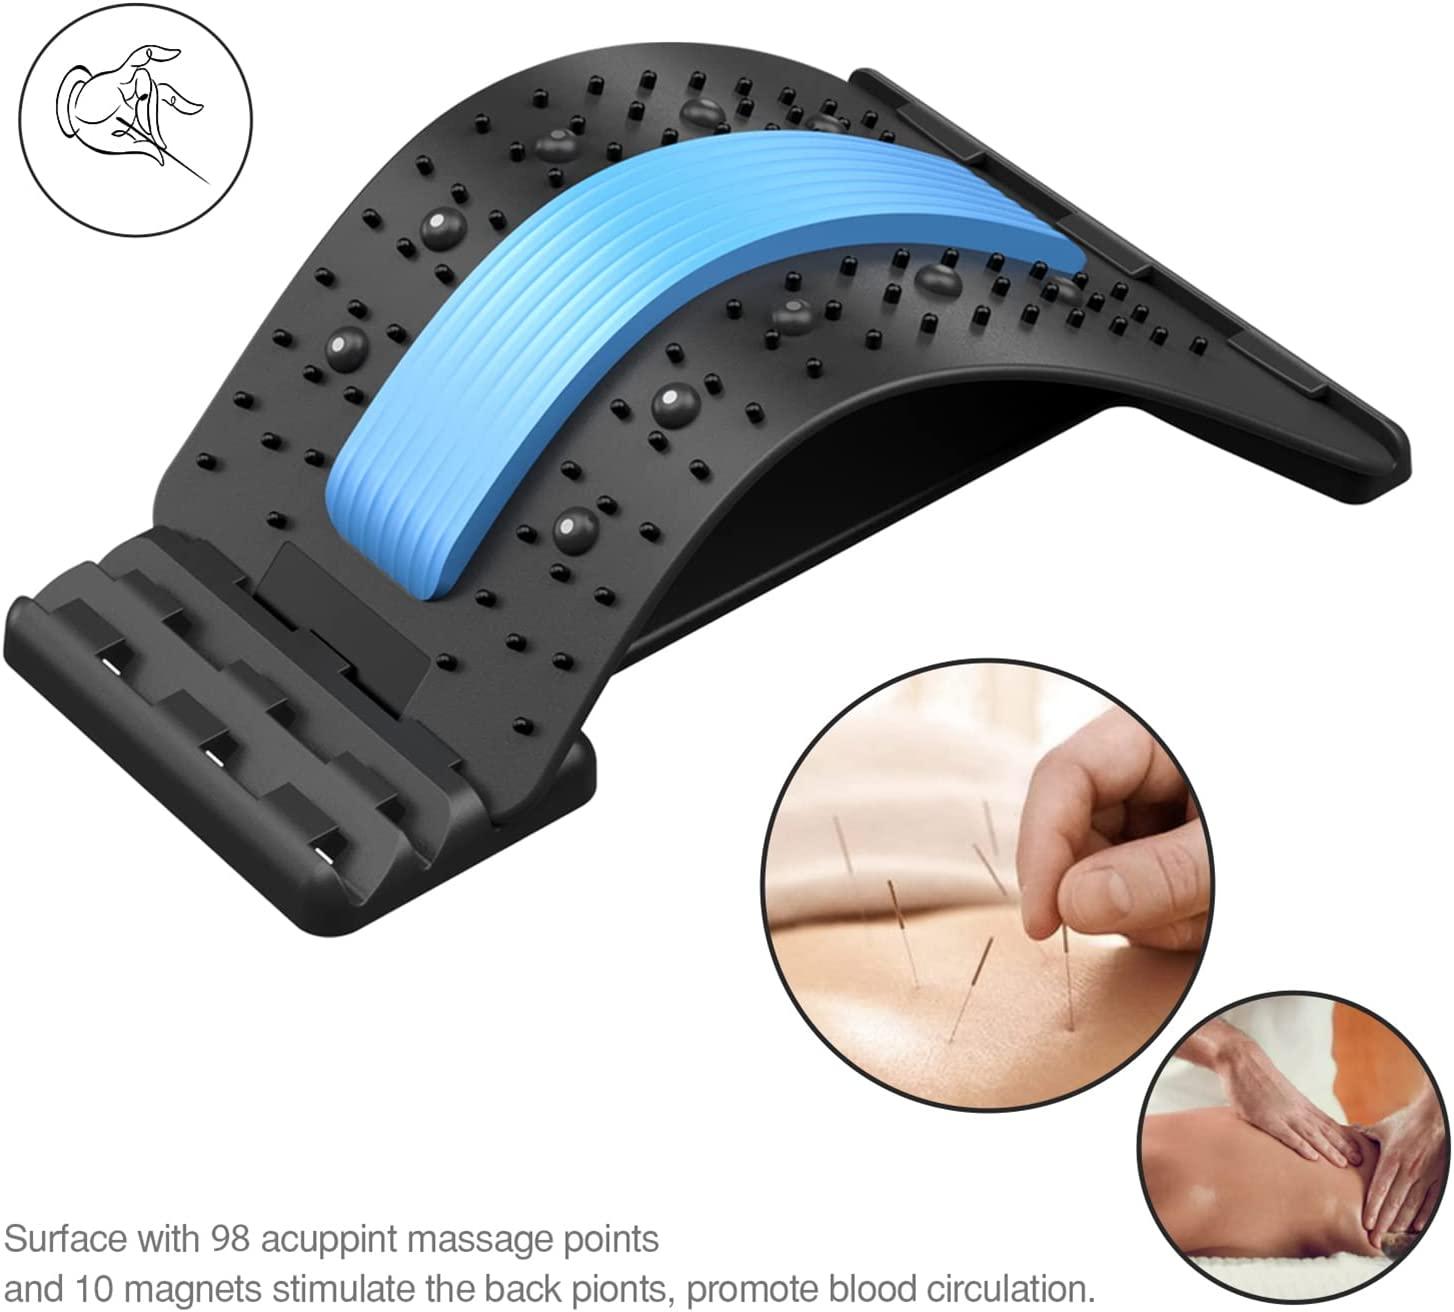  YILANFULL Back Stretcher, Spine Deck Back Pain Relief Products  with Magnetic Acupressure Points, Adjustable Back Cracker, Spine Deck Lower Back  Pain Relief for Sciatica, Herniated Disc, Scoliosis : Health & Household